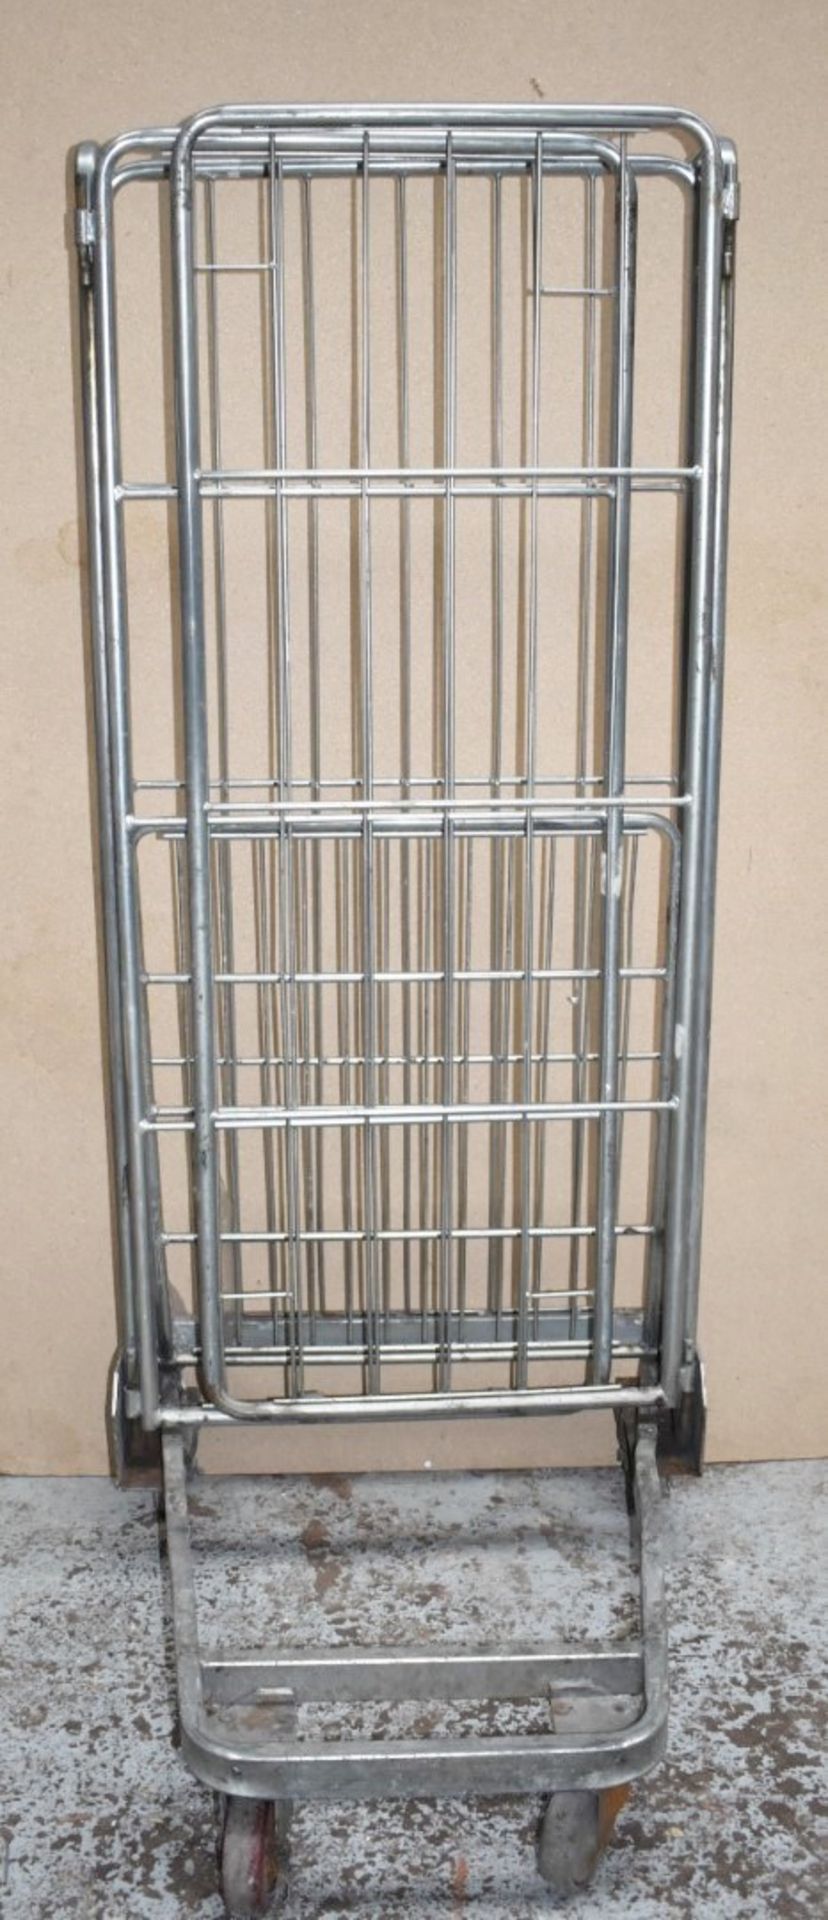 4 x Roller Cages With Heavy Duty Castors - Demountable With Three Sides - Ideal For Storing and - Image 10 of 11